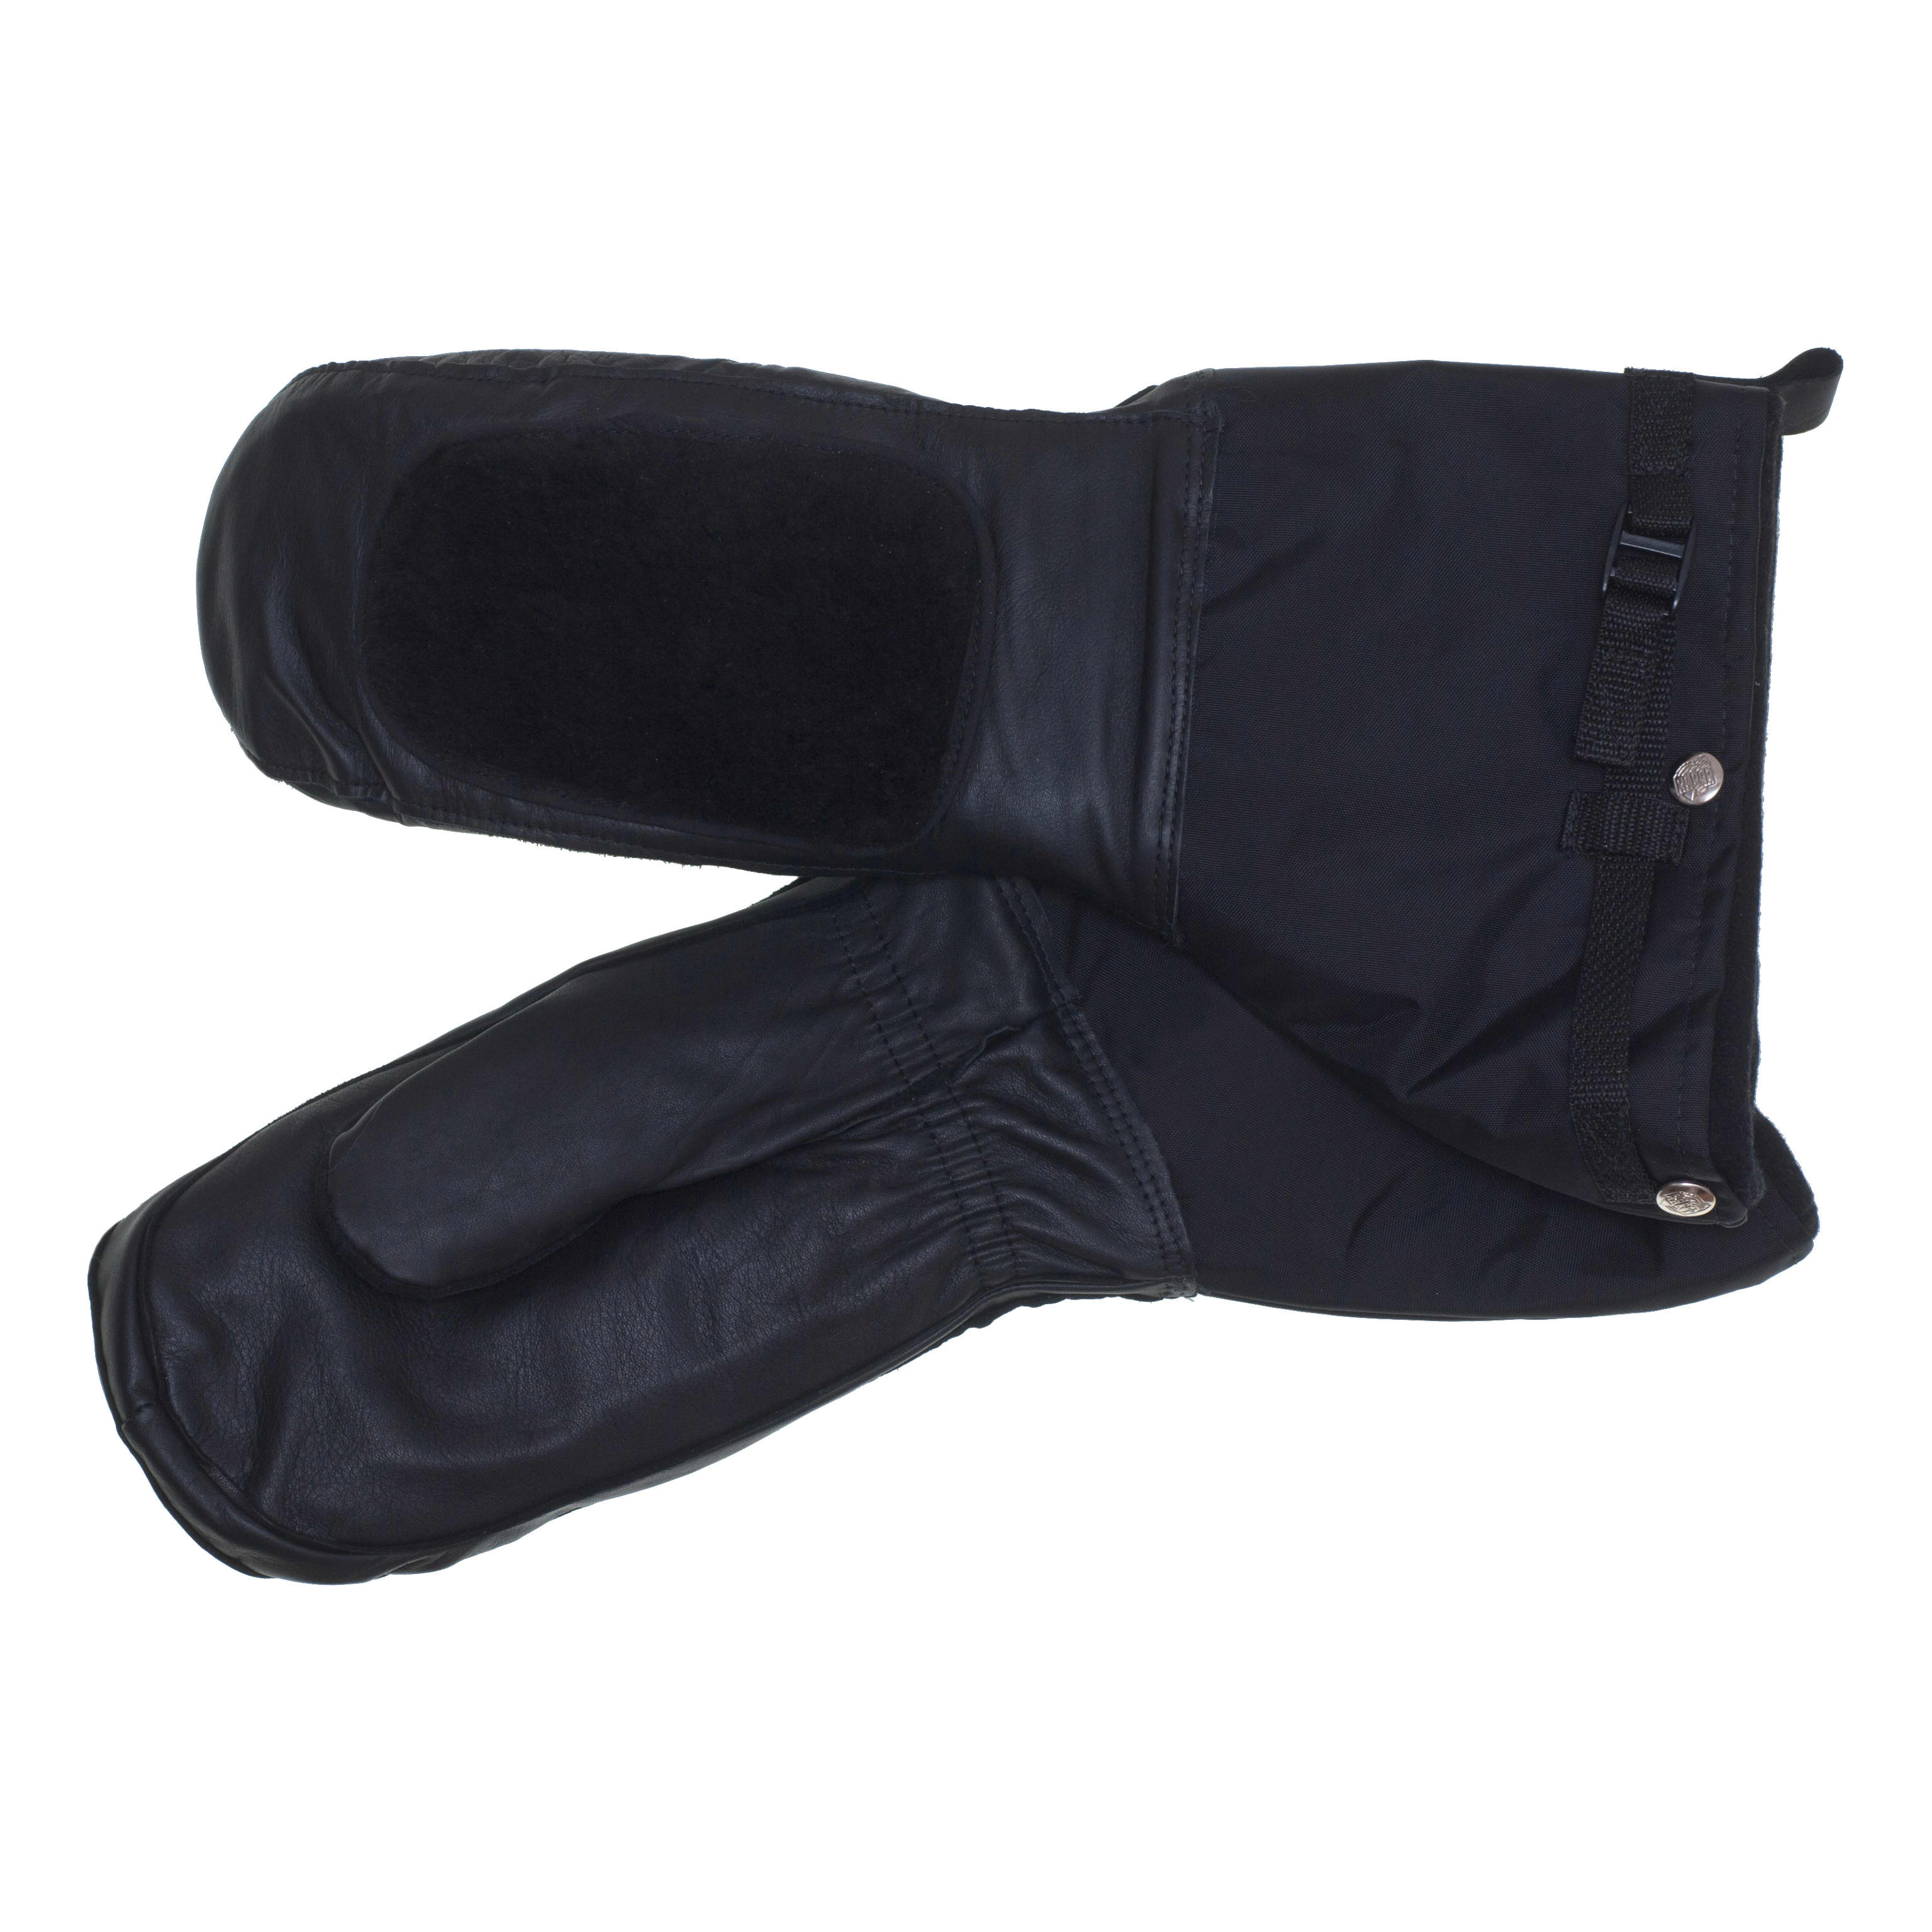 Raber HY-Arctic Extreme Gauntlet Mitt - Military Issue for Arctic Use |  Cabela's Canada